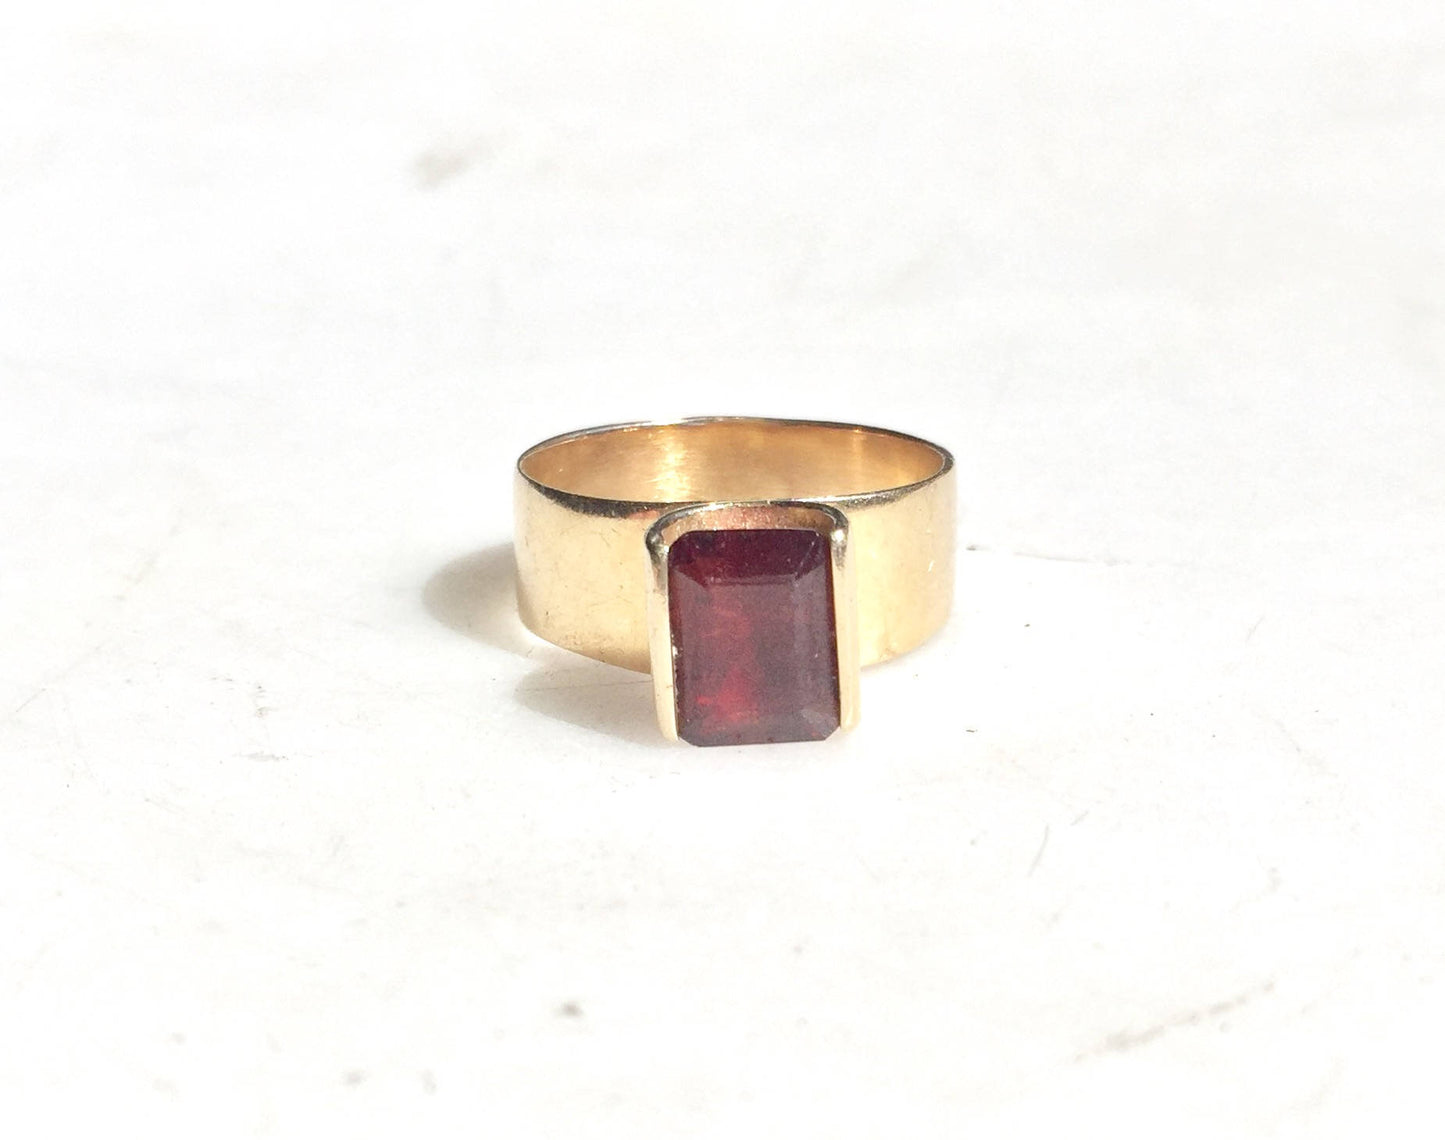 14K yellow gold ring with emerald cut garnet, vintage jewelry gift idea